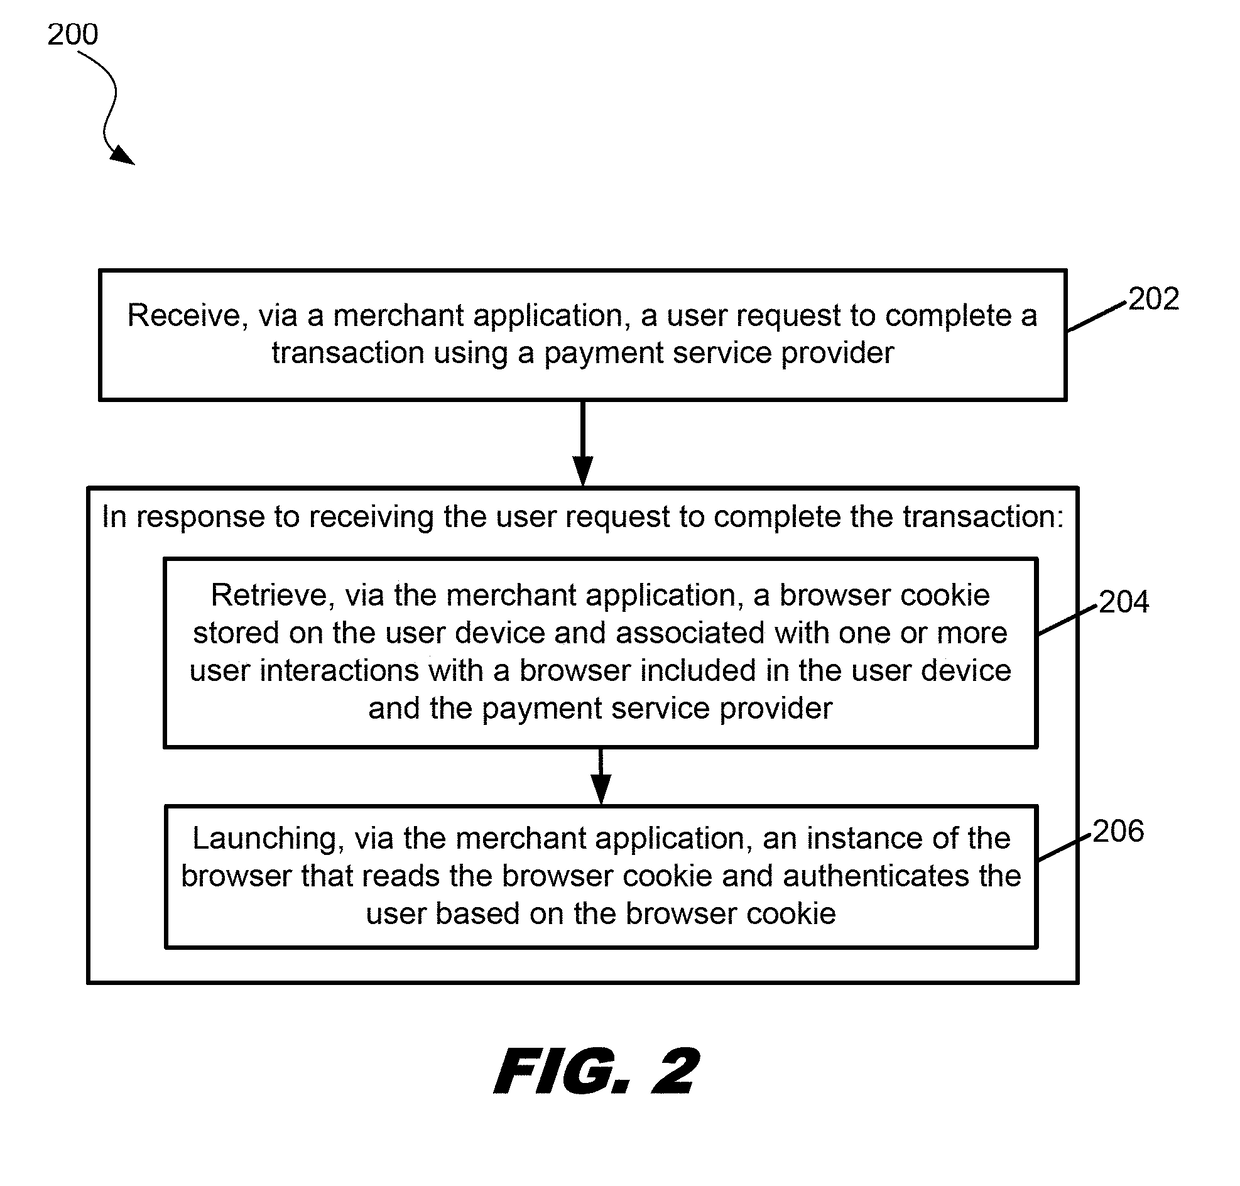 User authentication using a browser cookie shared between a browser and an application